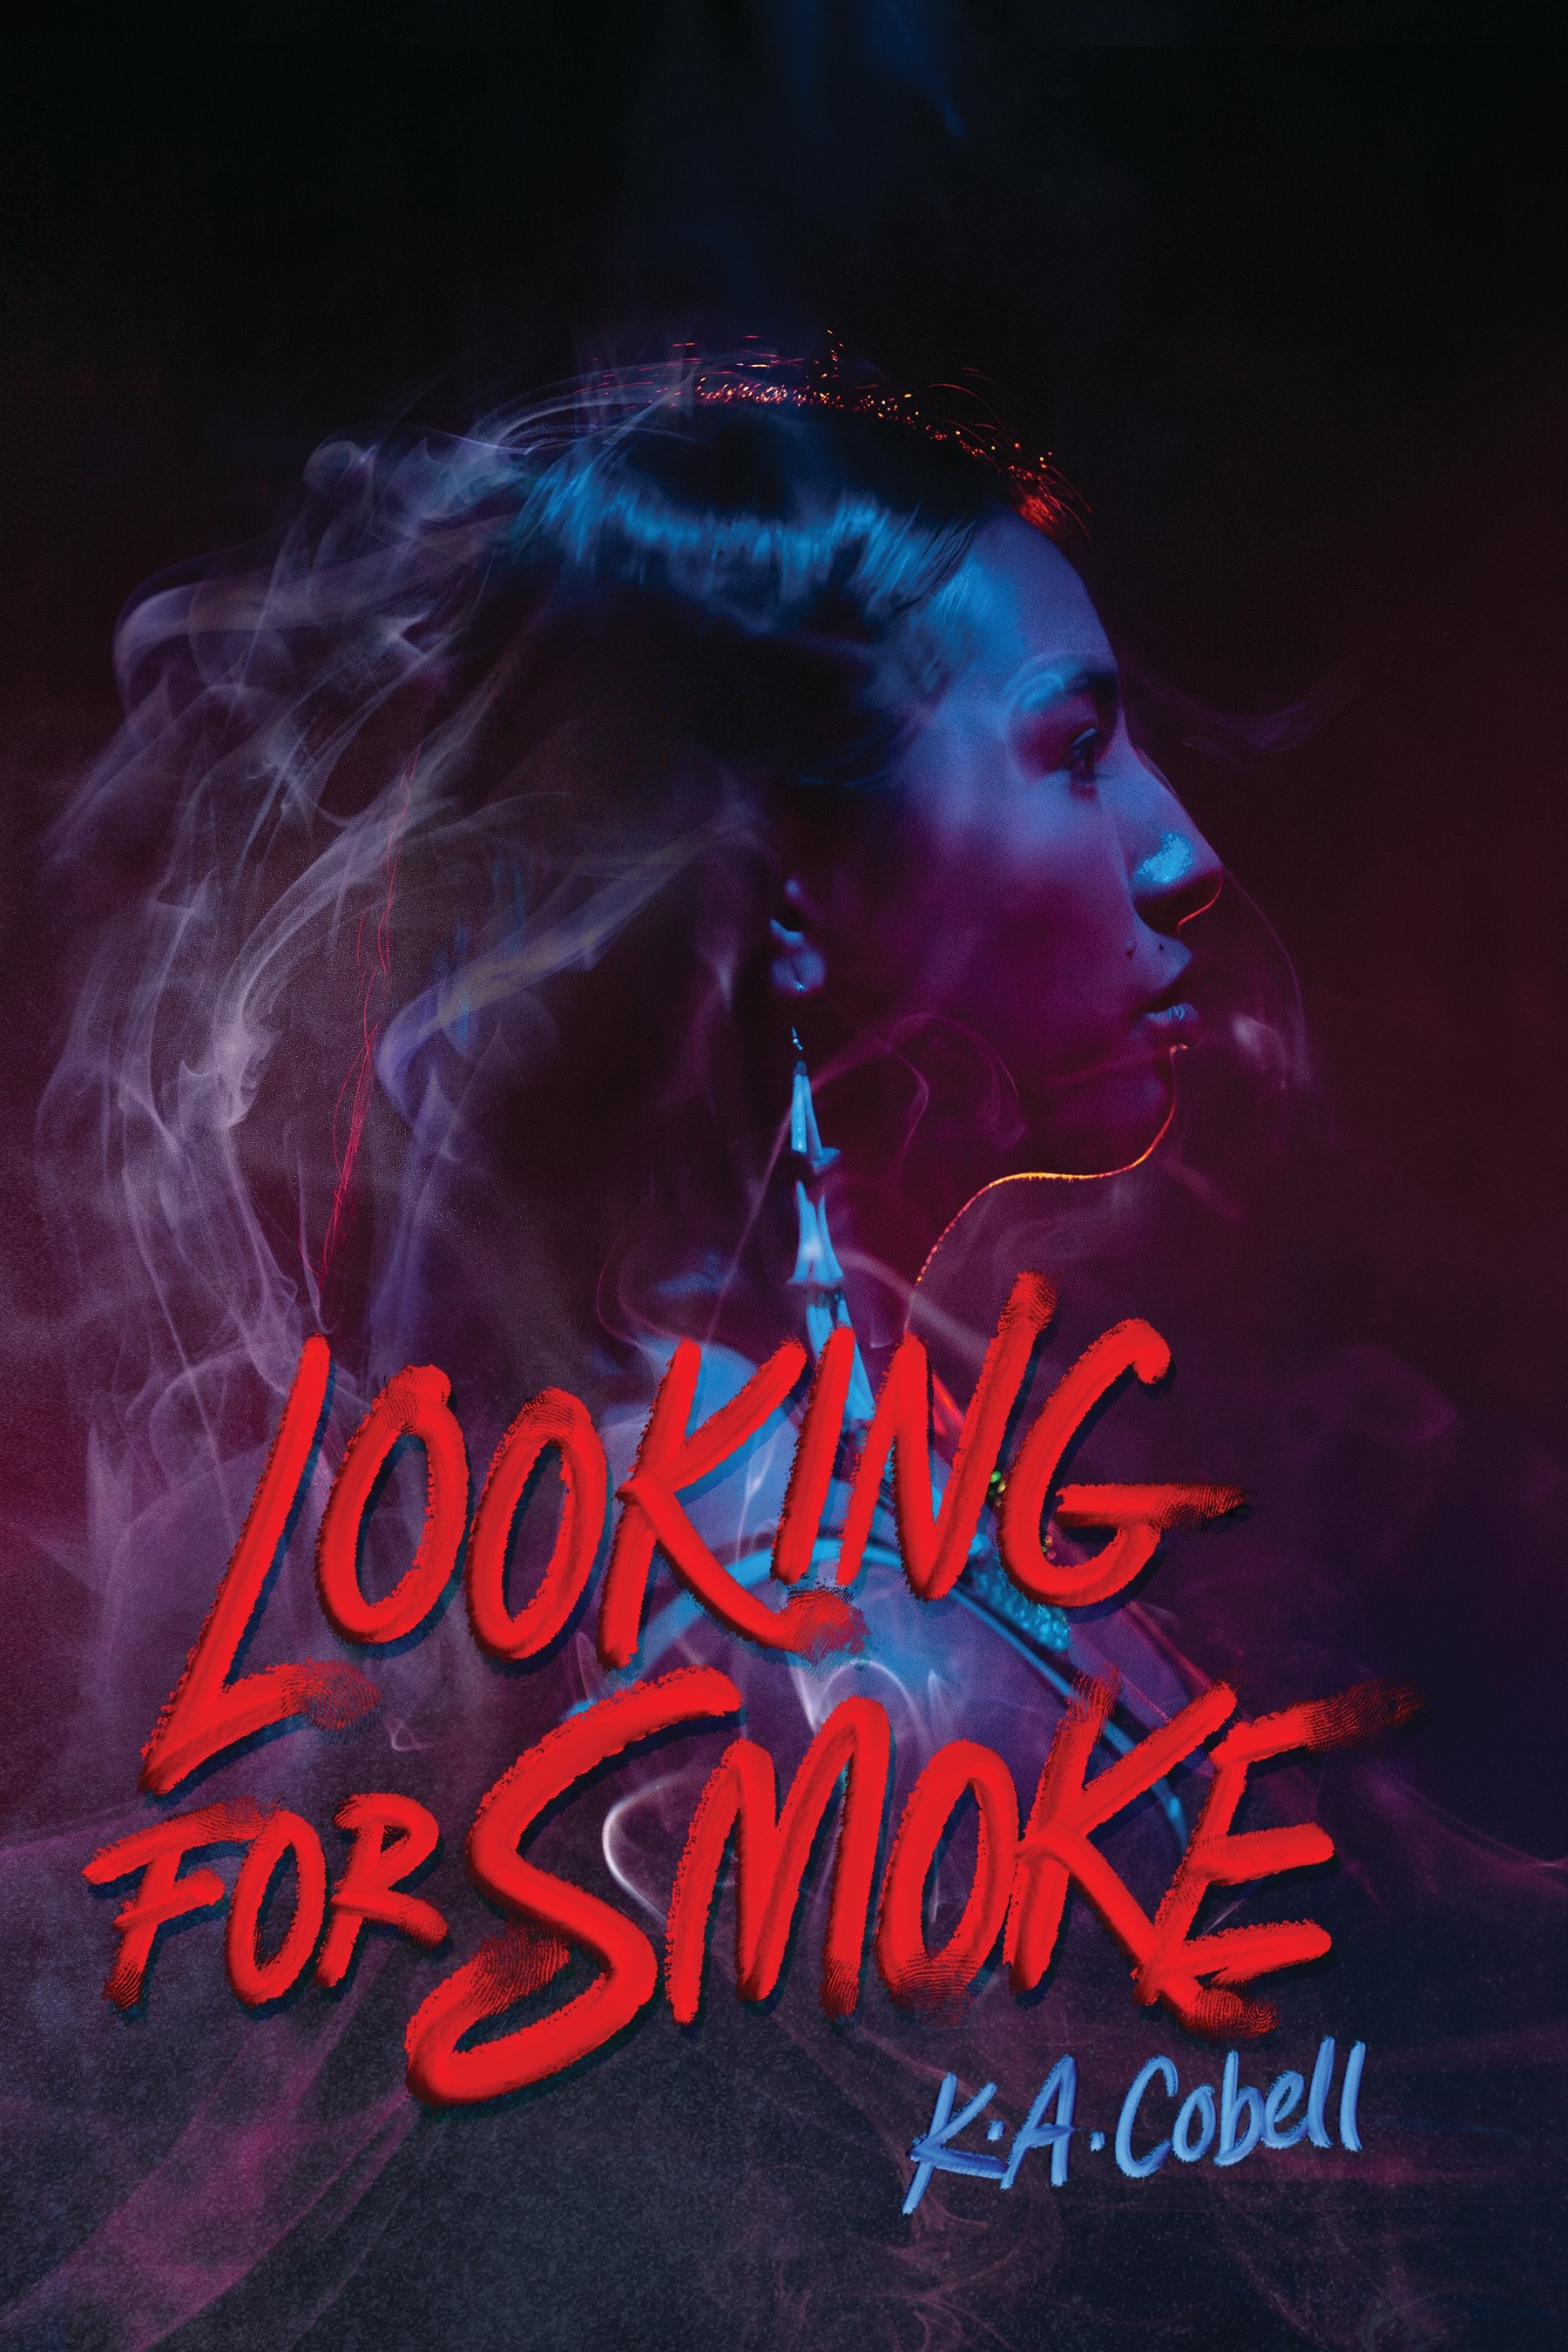 Author Event with K.A. Cobell/Looking For Smoke